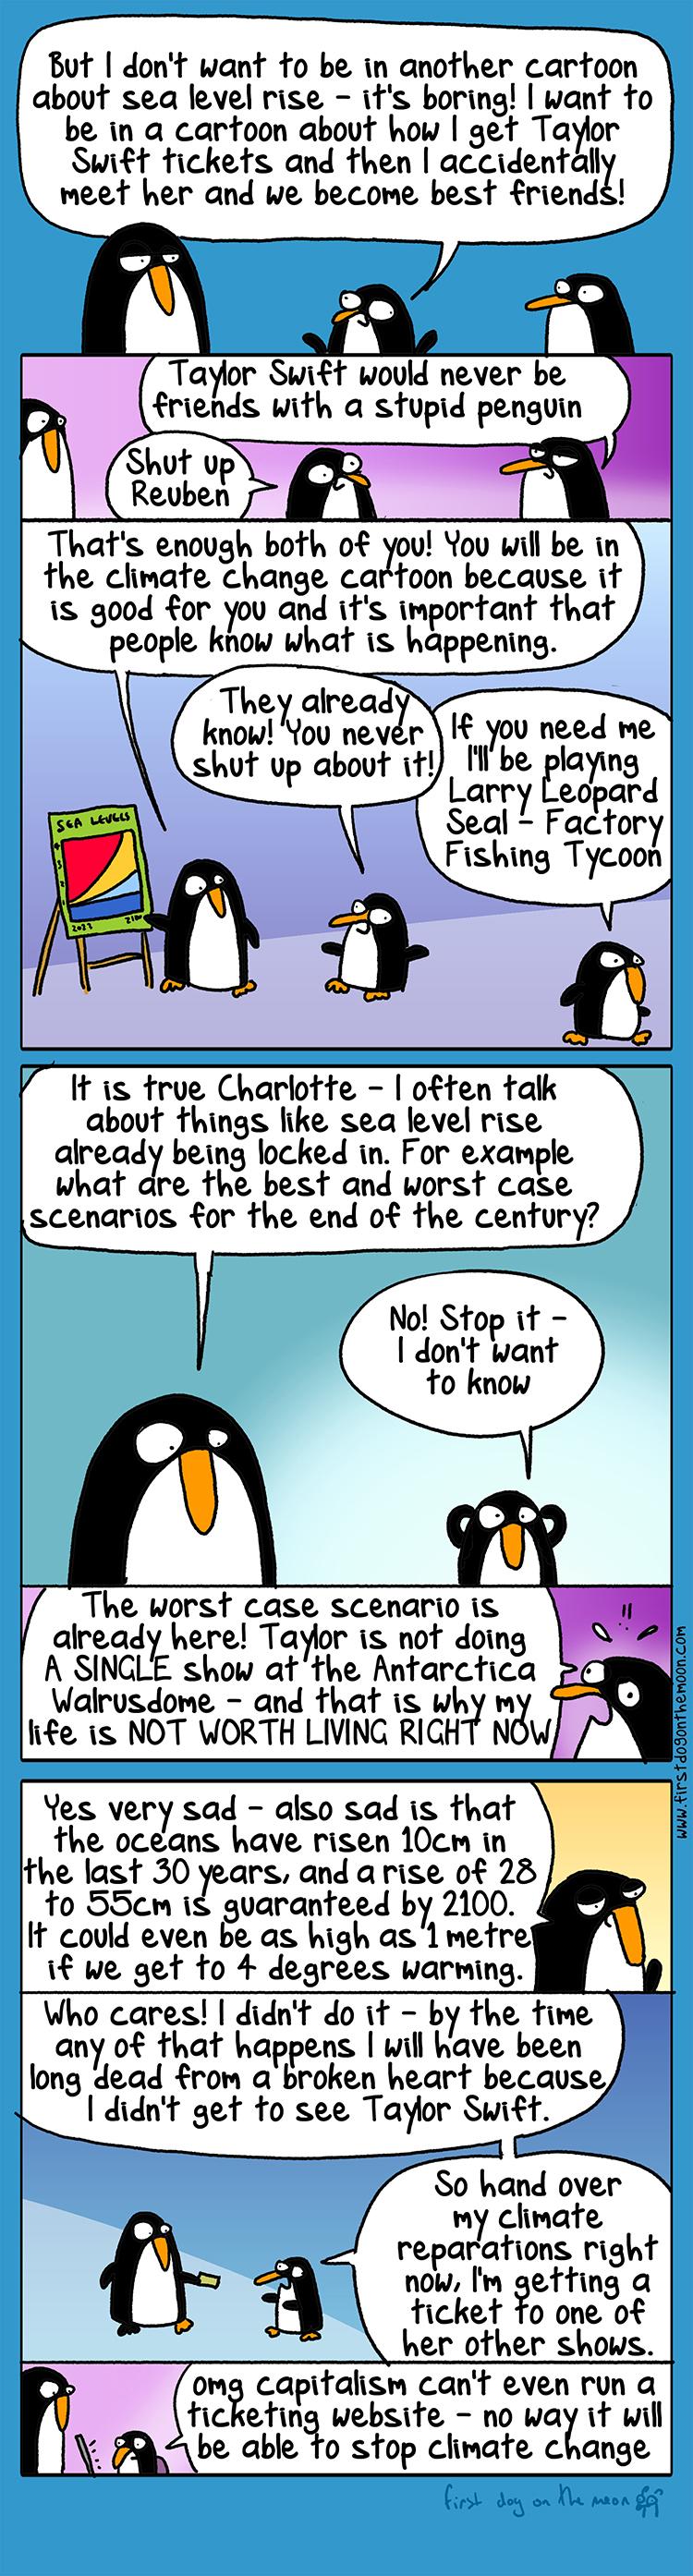 Three penguins argue about whether climate change is more important than getting Taylor Swift tickets.